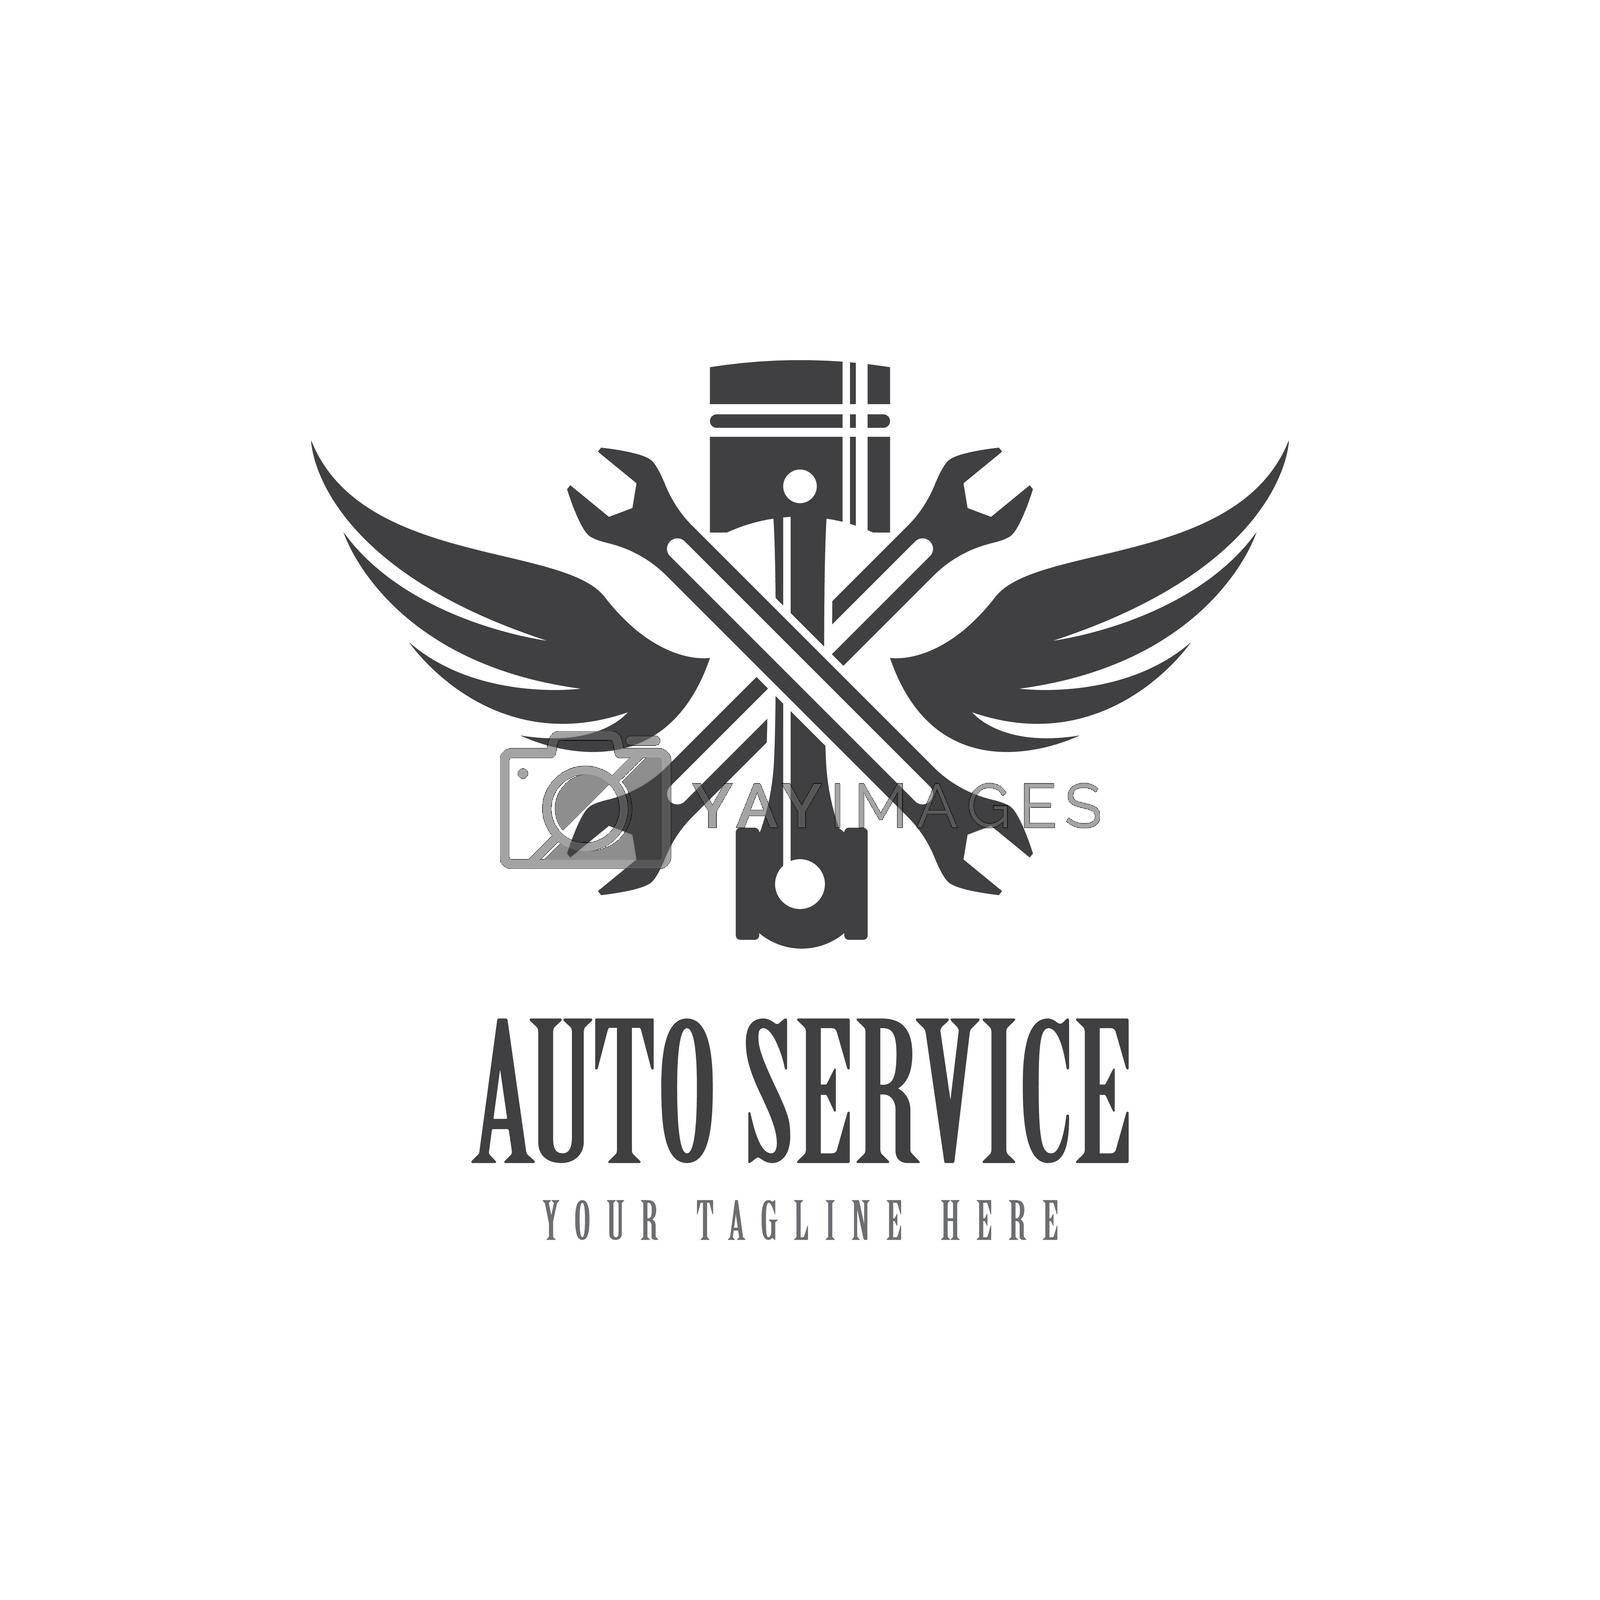 Royalty free image of Piston auto service design by awk